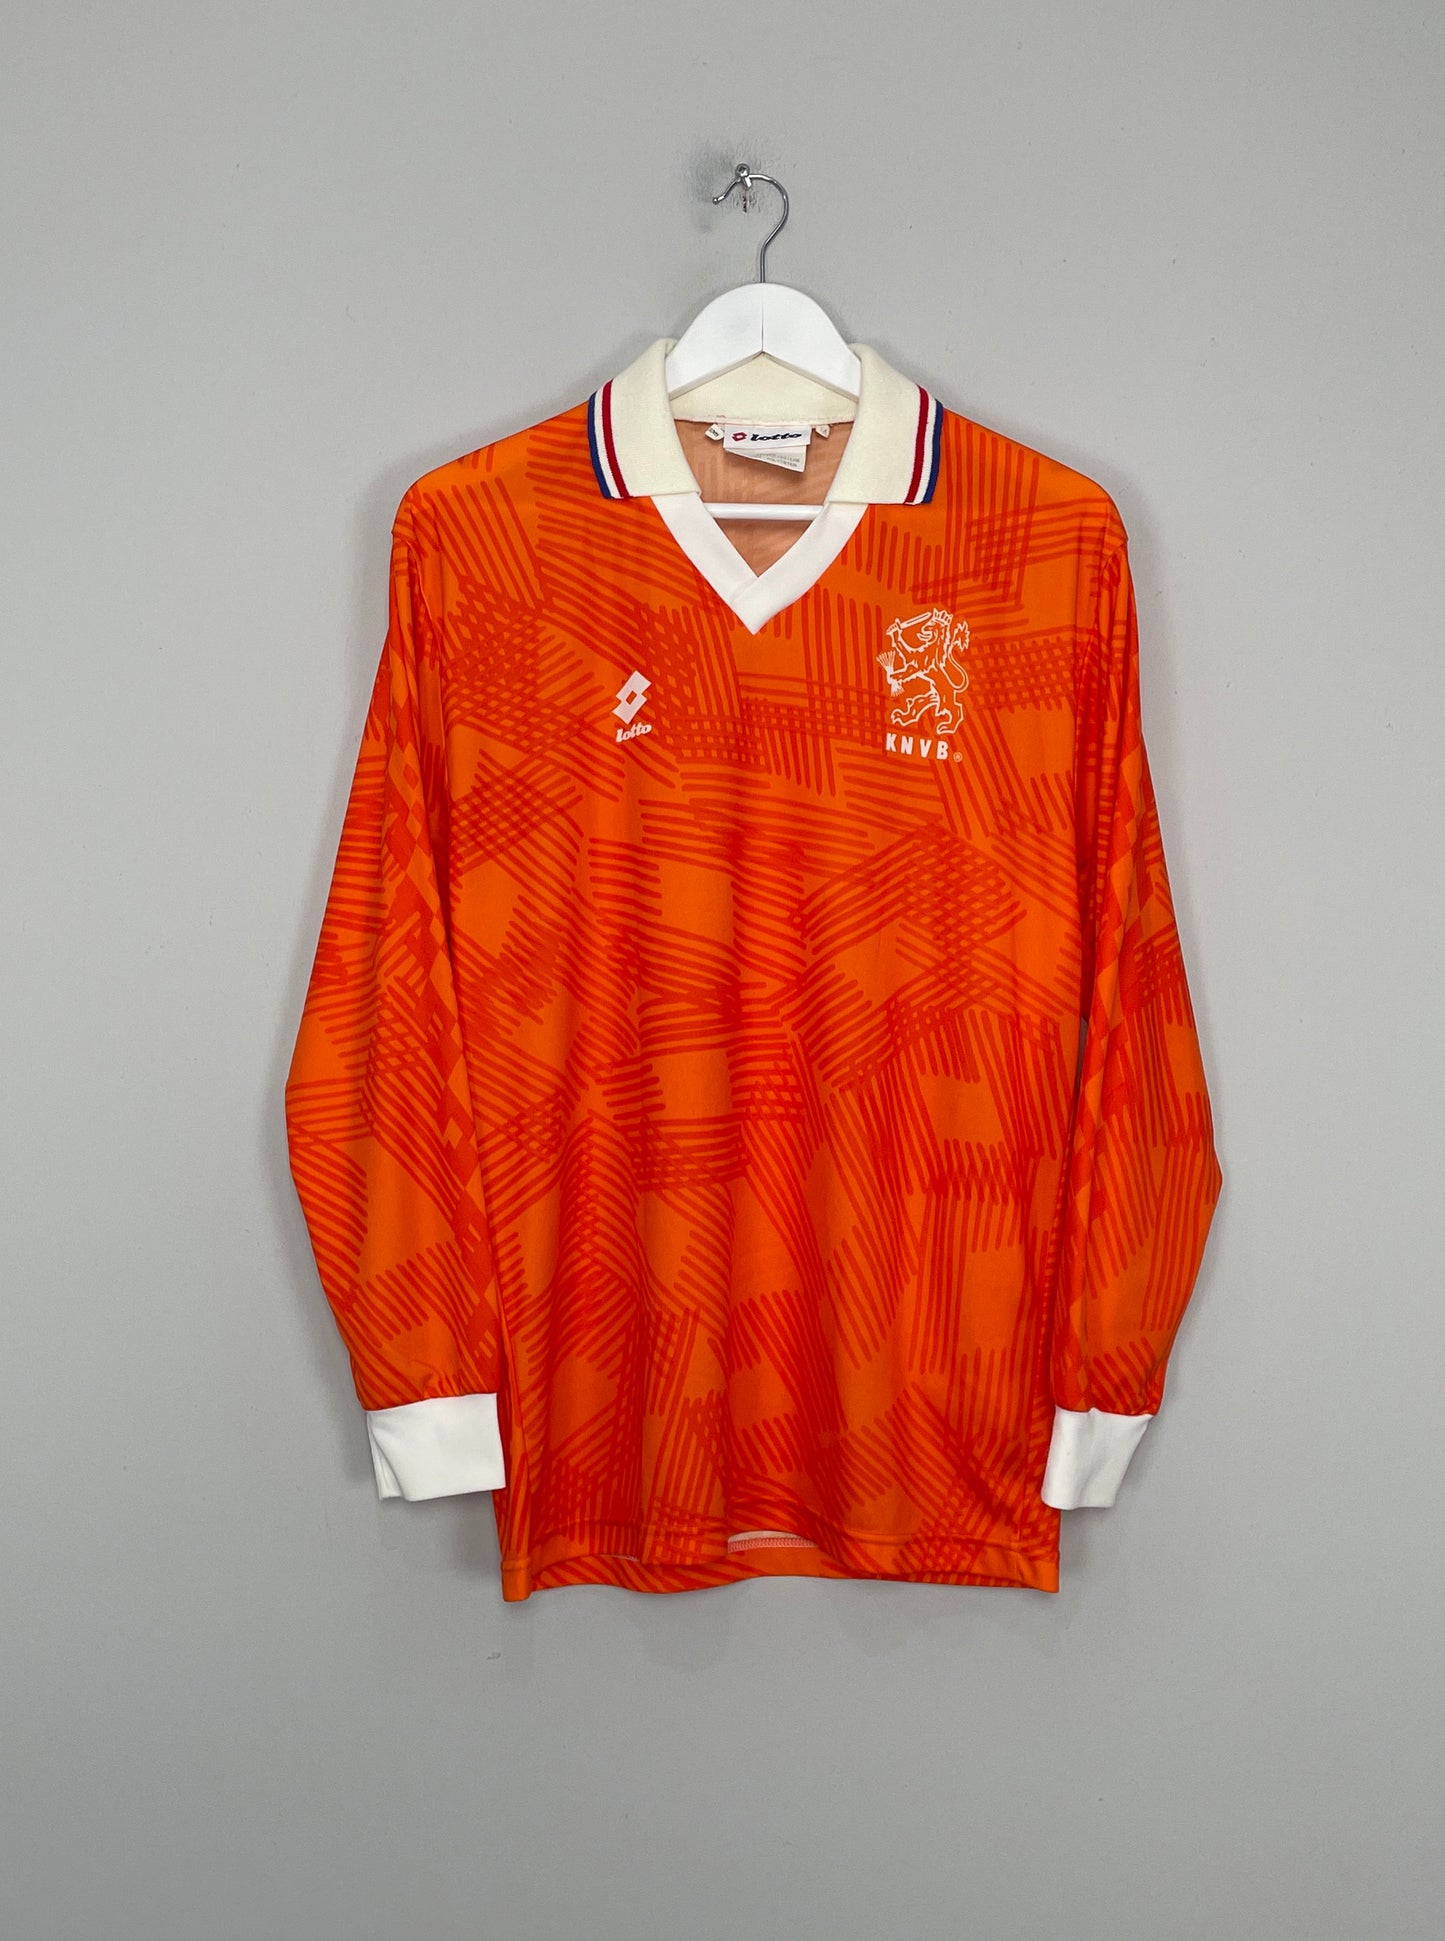 Image of the Netherlands shirt from the 1992/93 season